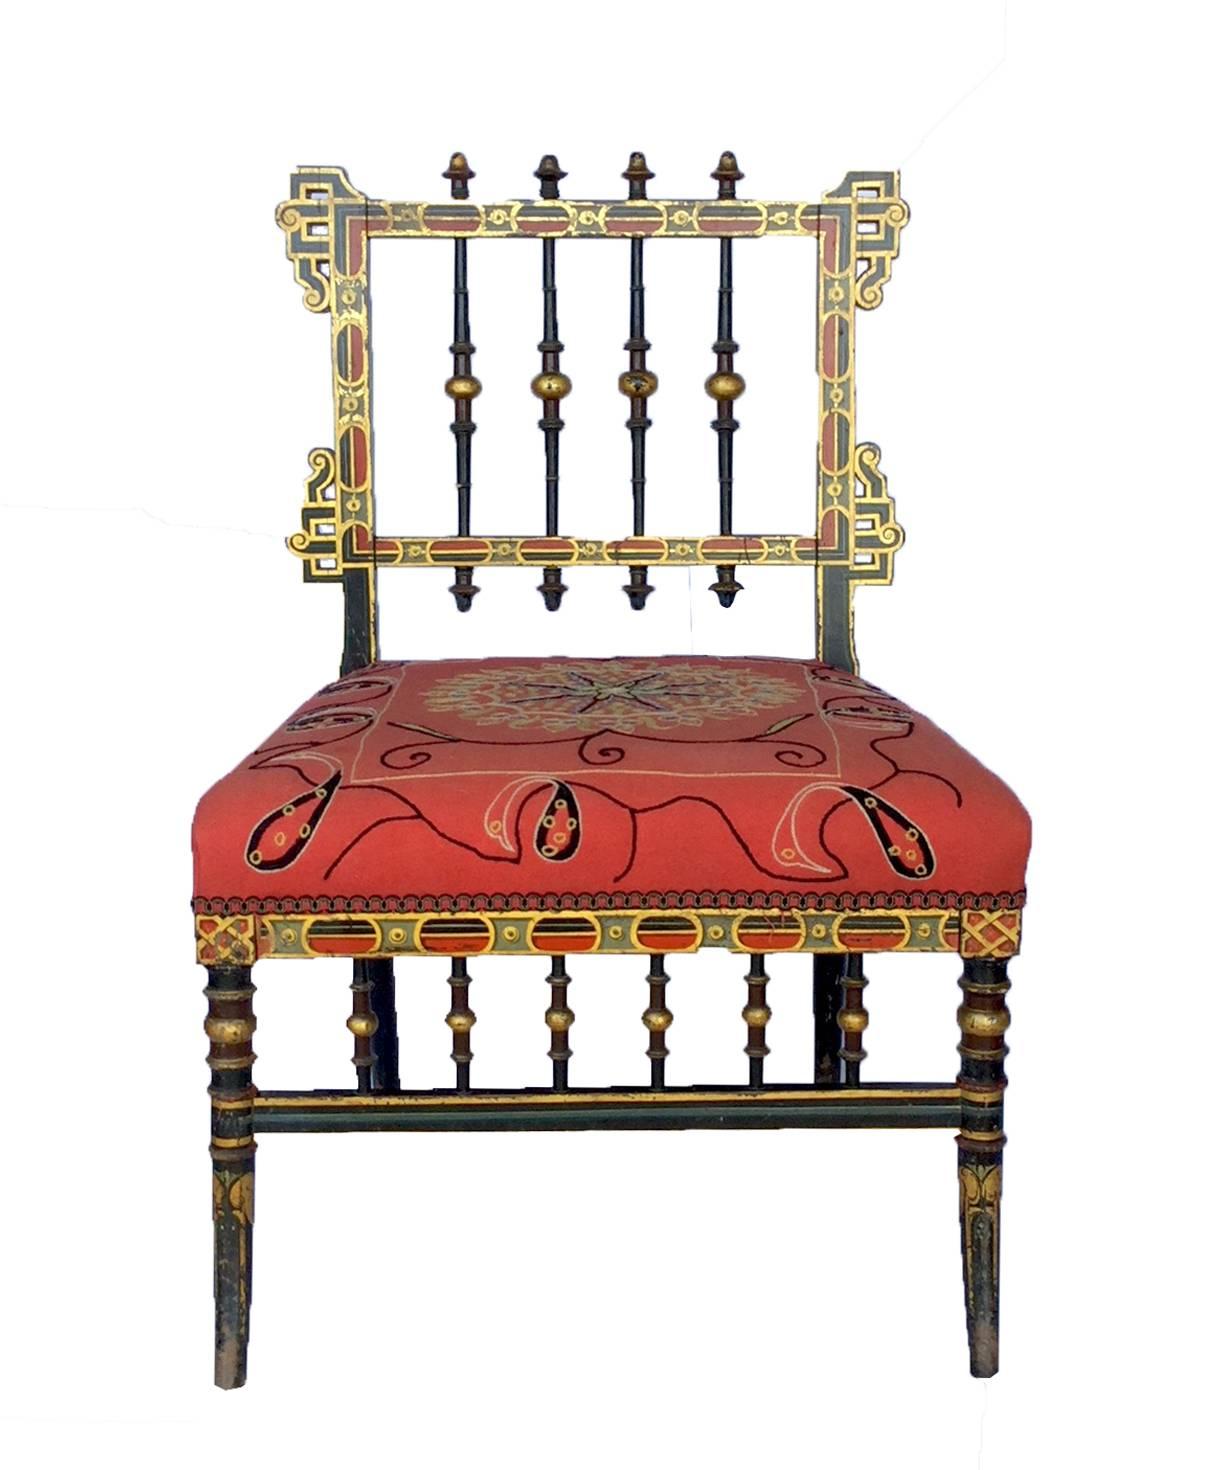 Napoleon III ebonized, polychrome and gilt-decorated slipper chair, circa 1850, beautifully upholstered in hand embroidered multi color fabric which coordinates with intricately painted and gold leafed carving.